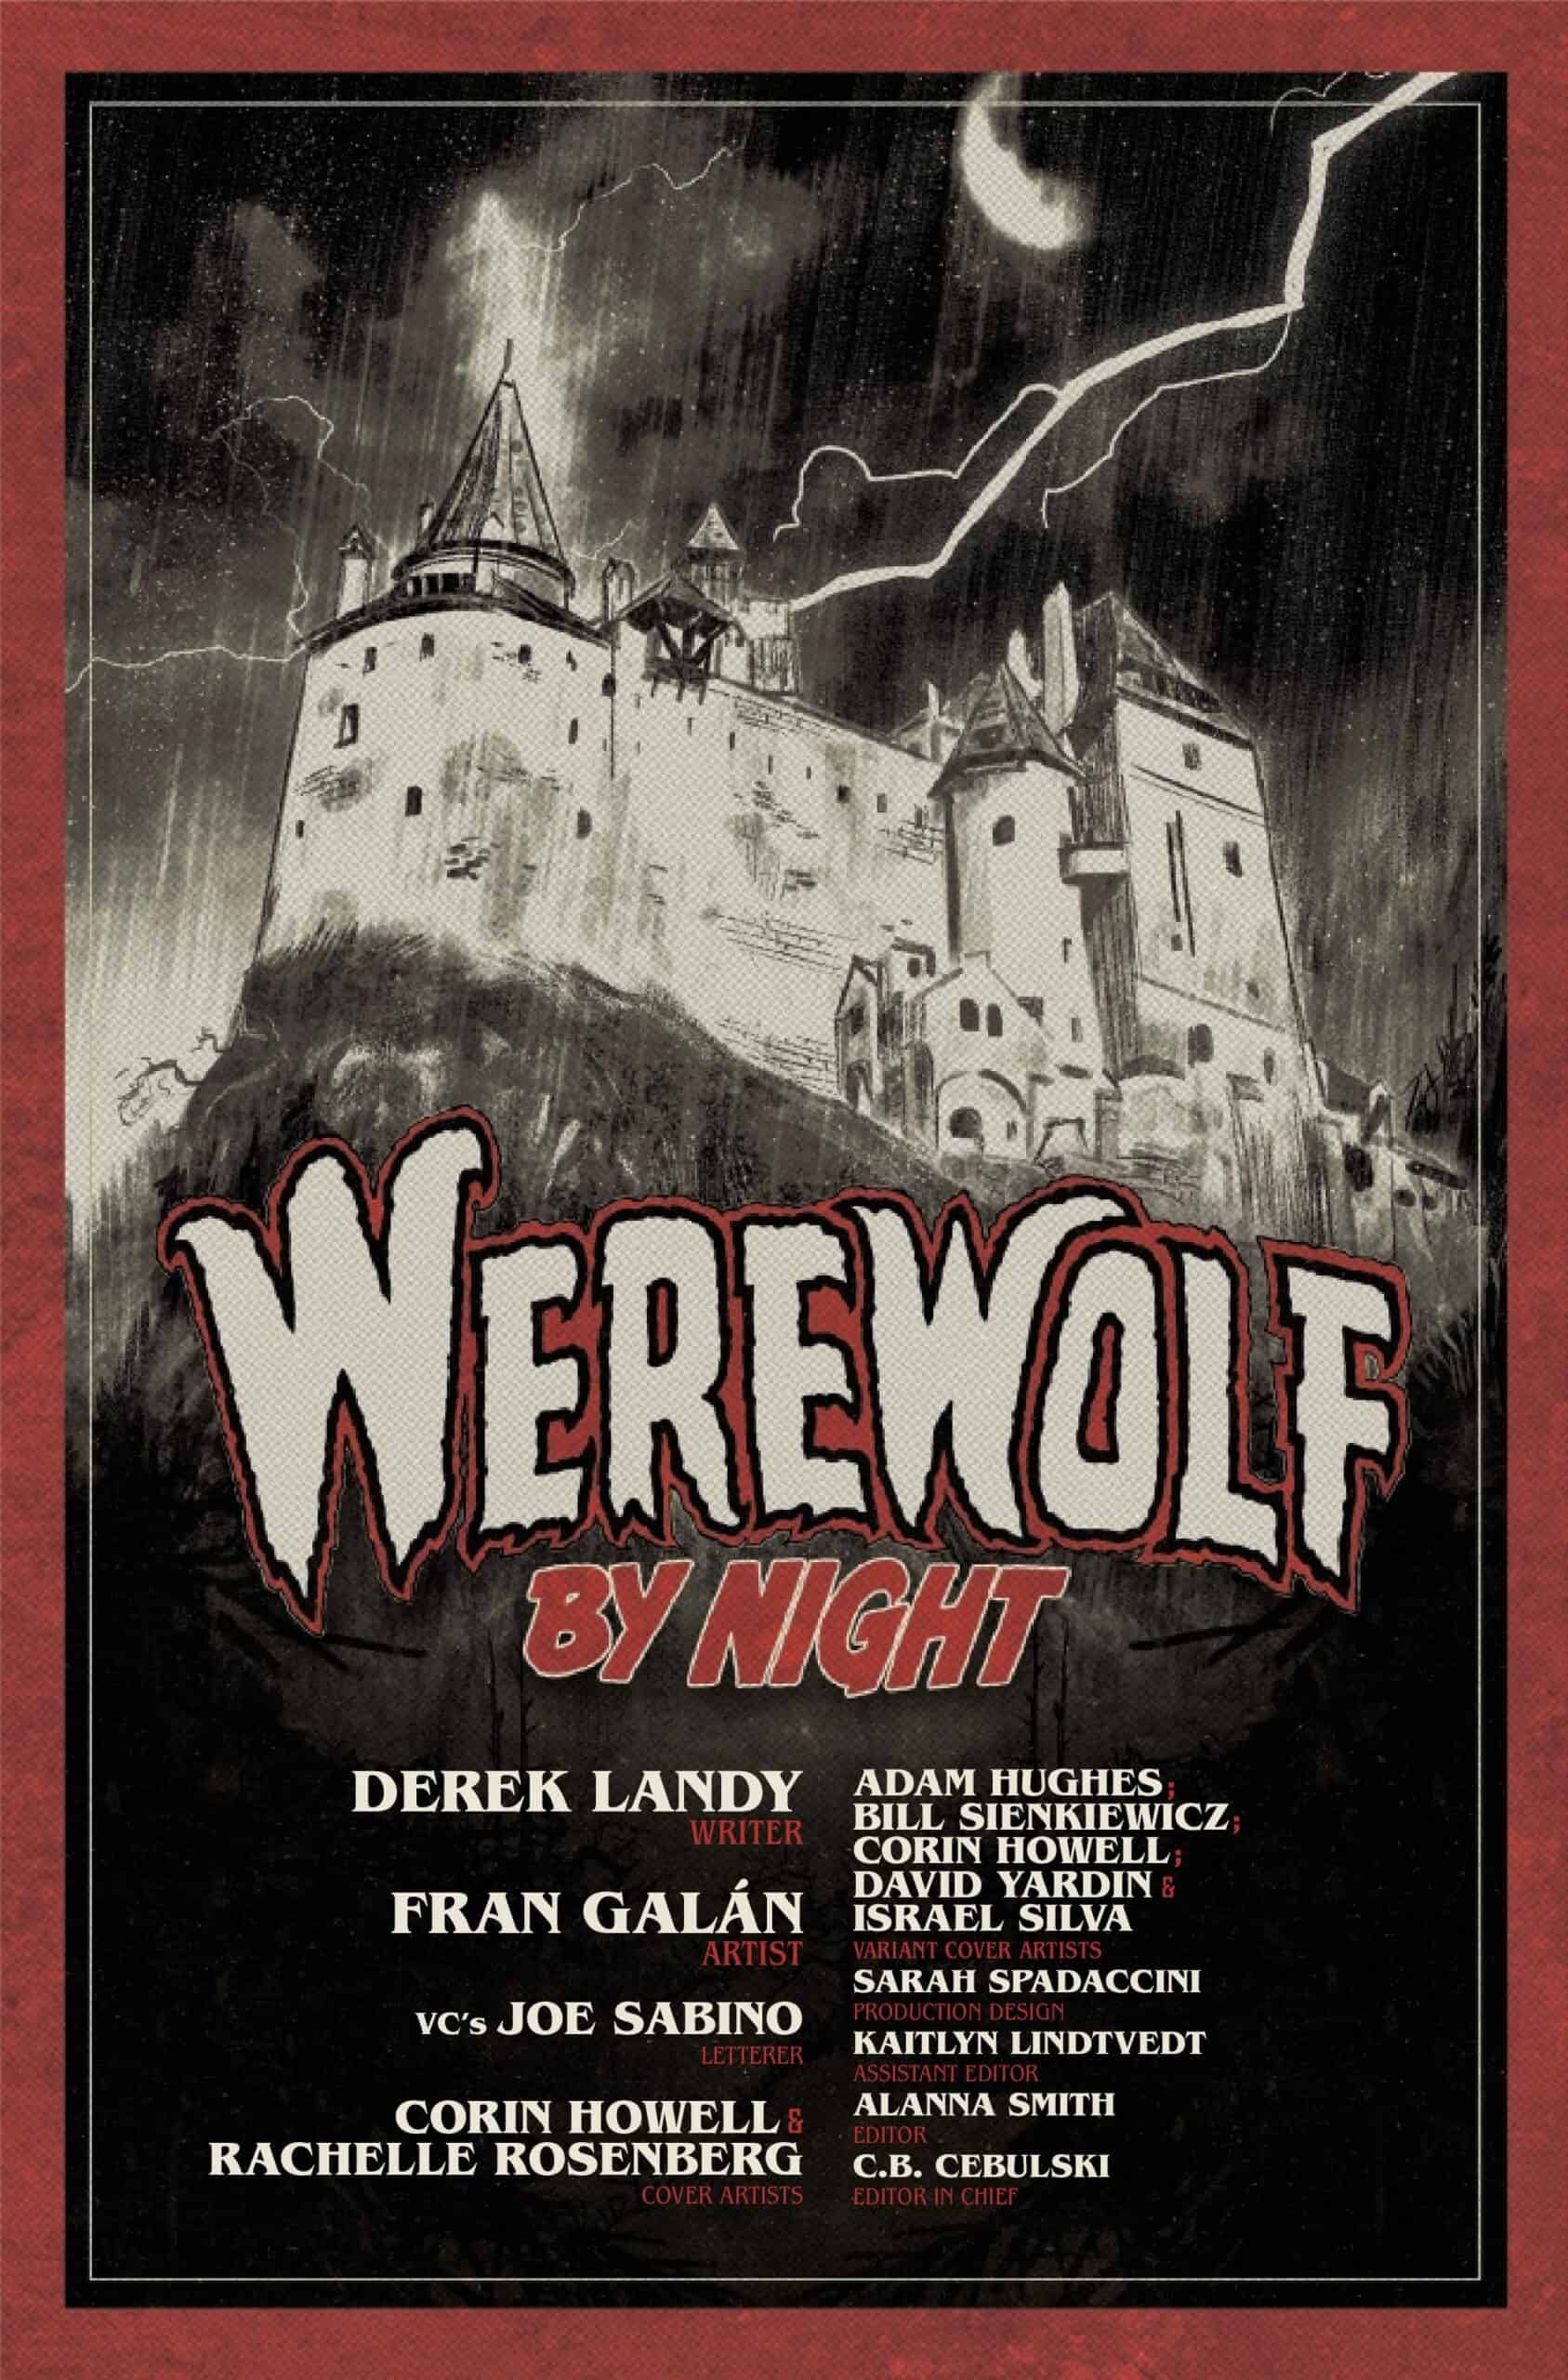 Werewolf By Night (2023) #1, Comic Issues